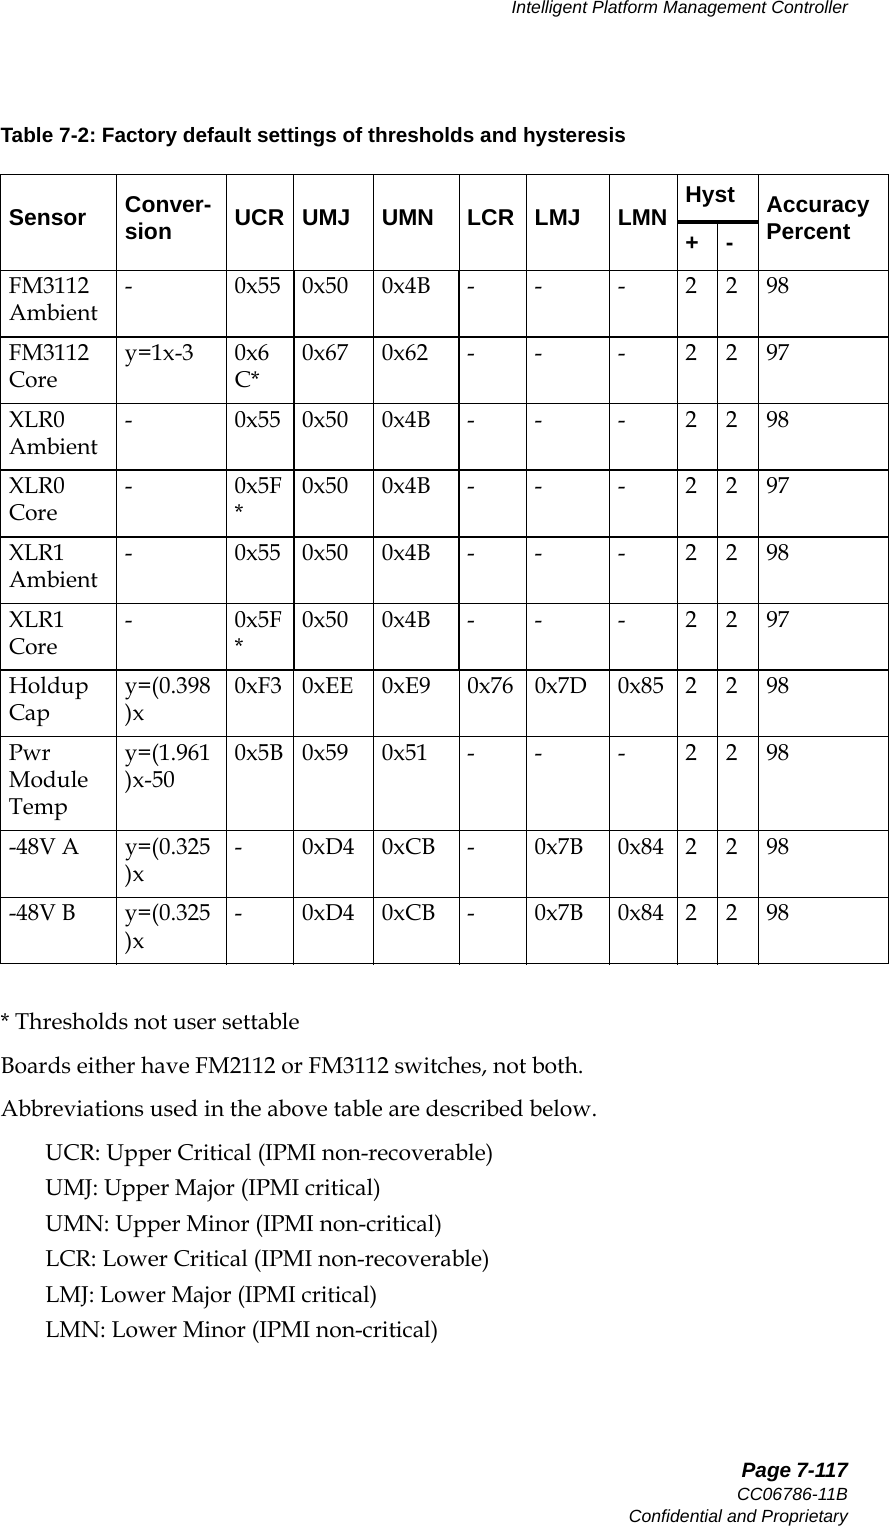   Page 7-117CC06786-11BConfidential and ProprietaryIntelligent Platform Management Controller14ABABPreliminary* Thresholds not user settableBoards either have FM2112 or FM3112 switches, not both. Abbreviations used in the above table are described below.UCR: Upper Critical (IPMI non-recoverable)UMJ: Upper Major (IPMI critical)UMN: Upper Minor (IPMI non-critical)LCR: Lower Critical (IPMI non-recoverable)LMJ: Lower Major (IPMI critical)LMN: Lower Minor (IPMI non-critical)FM3112 Ambient- 0x55 0x50 0x4B - - - 2 2 98FM3112 Corey=1x-3 0x6C*0x67 0x62 - - - 2 2 97XLR0 Ambient- 0x55 0x50 0x4B - - - 2 2 98XLR0 Core-0x5F*0x50 0x4B - - - 2 2 97XLR1 Ambient- 0x55 0x50 0x4B - - - 2 2 98XLR1 Core-0x5F*0x50 0x4B - - - 2 2 97Holdup Capy=(0.398)x0xF3 0xEE 0xE9 0x76 0x7D 0x85 2 2 98Pwr Module Tempy=(1.961)x-500x5B 0x59 0x51 - - - 2 2 98-48V A y=(0.325)x- 0xD4 0xCB - 0x7B 0x84 2 2 98-48V B y=(0.325)x- 0xD4 0xCB - 0x7B 0x84 2 2 98Table 7-2: Factory default settings of thresholds and hysteresisSensor Conver-sion UCR UMJ UMN LCR LMJ LMN Hyst Accuracy Percent+-